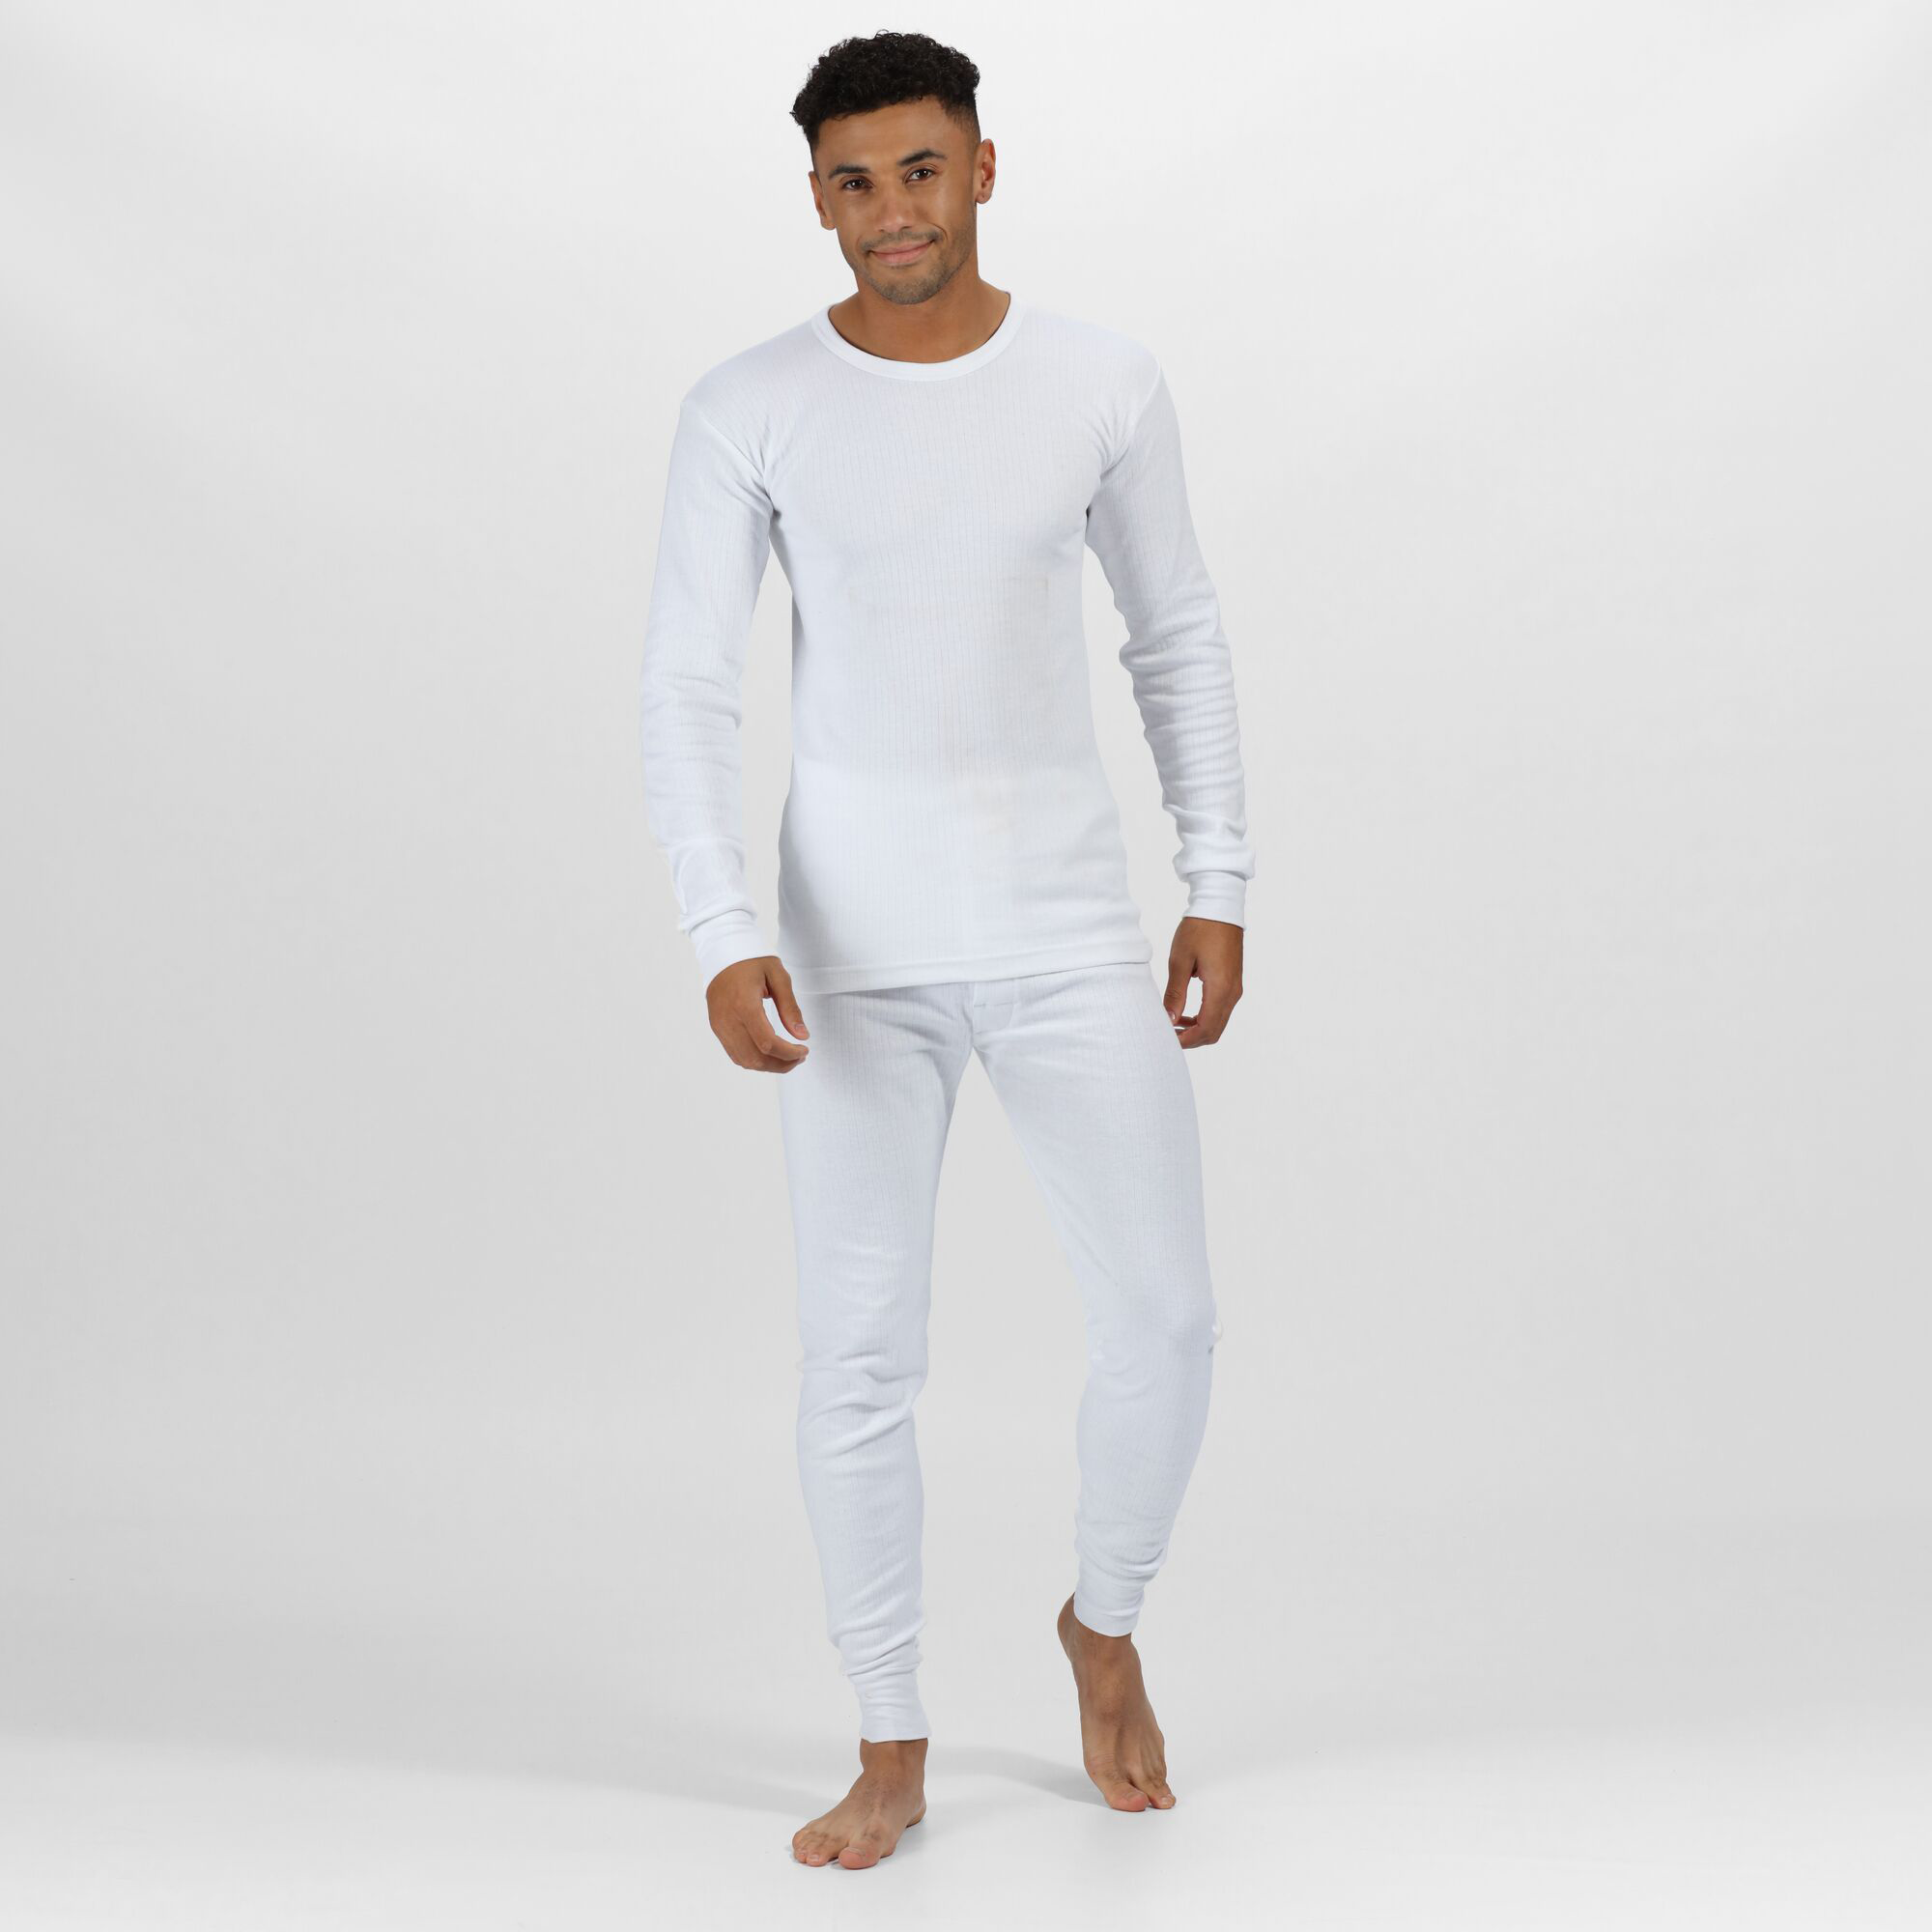 THERMAL LONG SLEEVE VEST AND LONG JOHNS - Regatta Professional